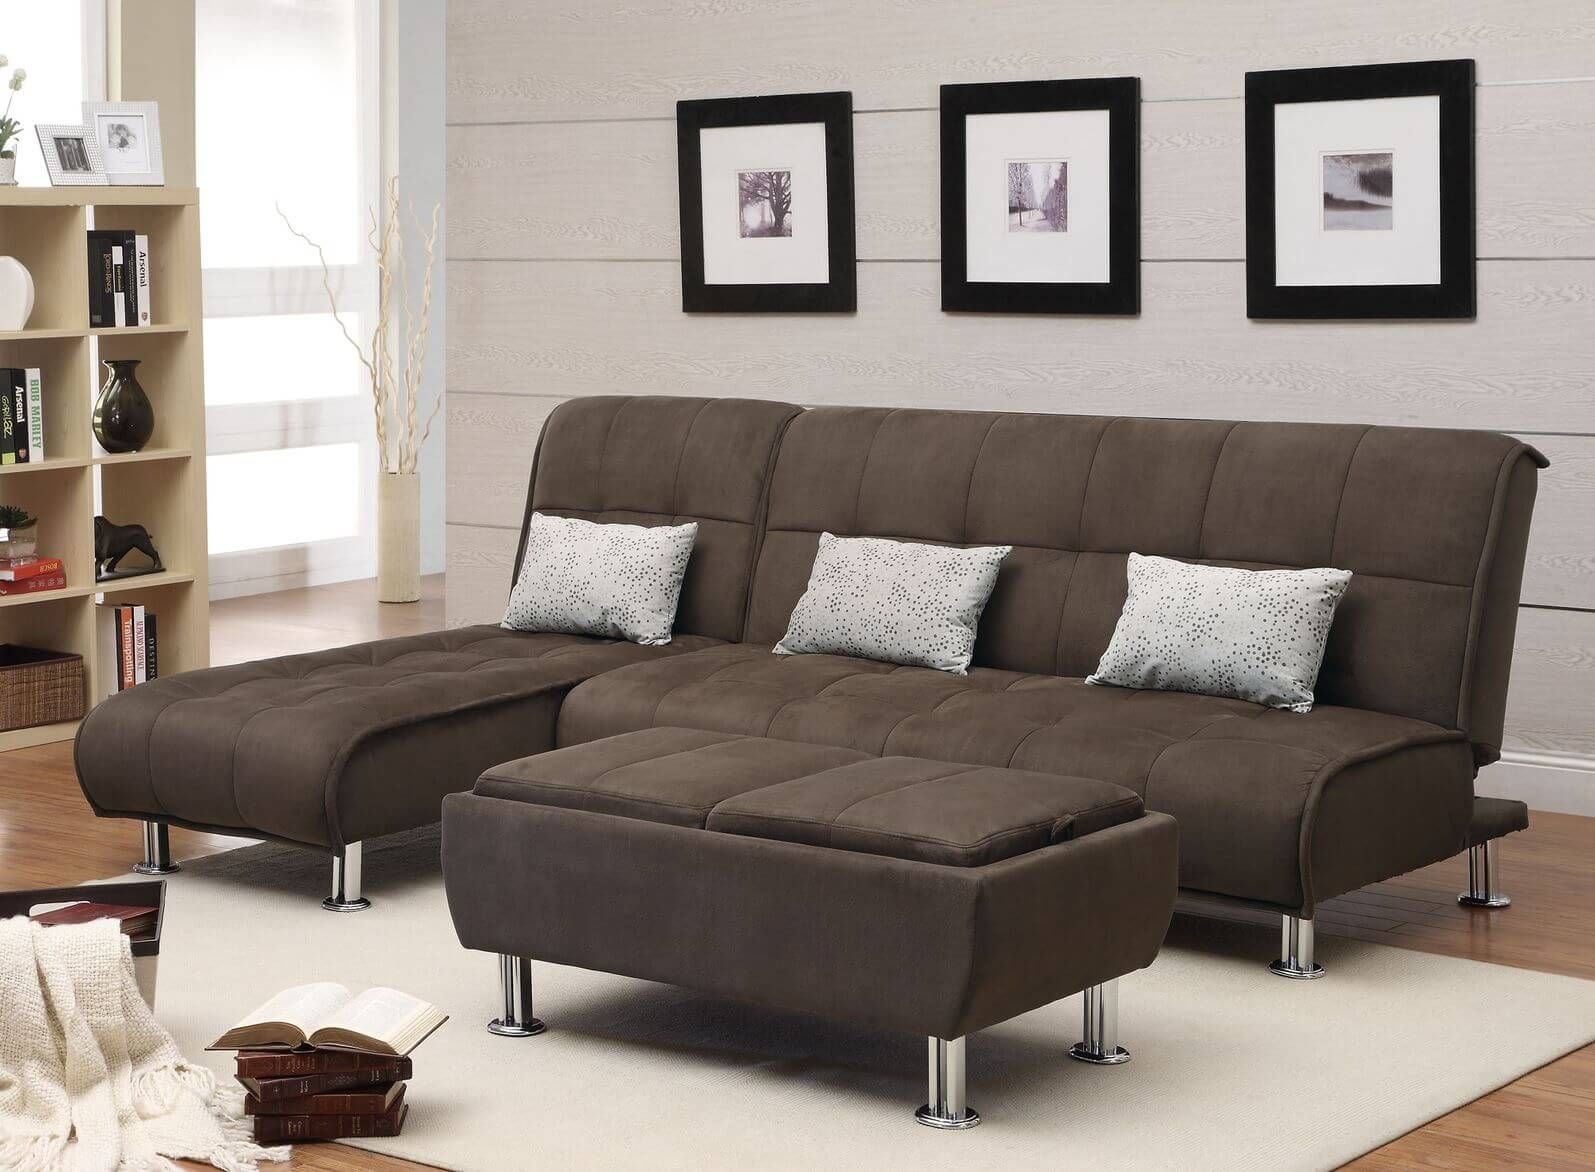 sofa bed with coffee table